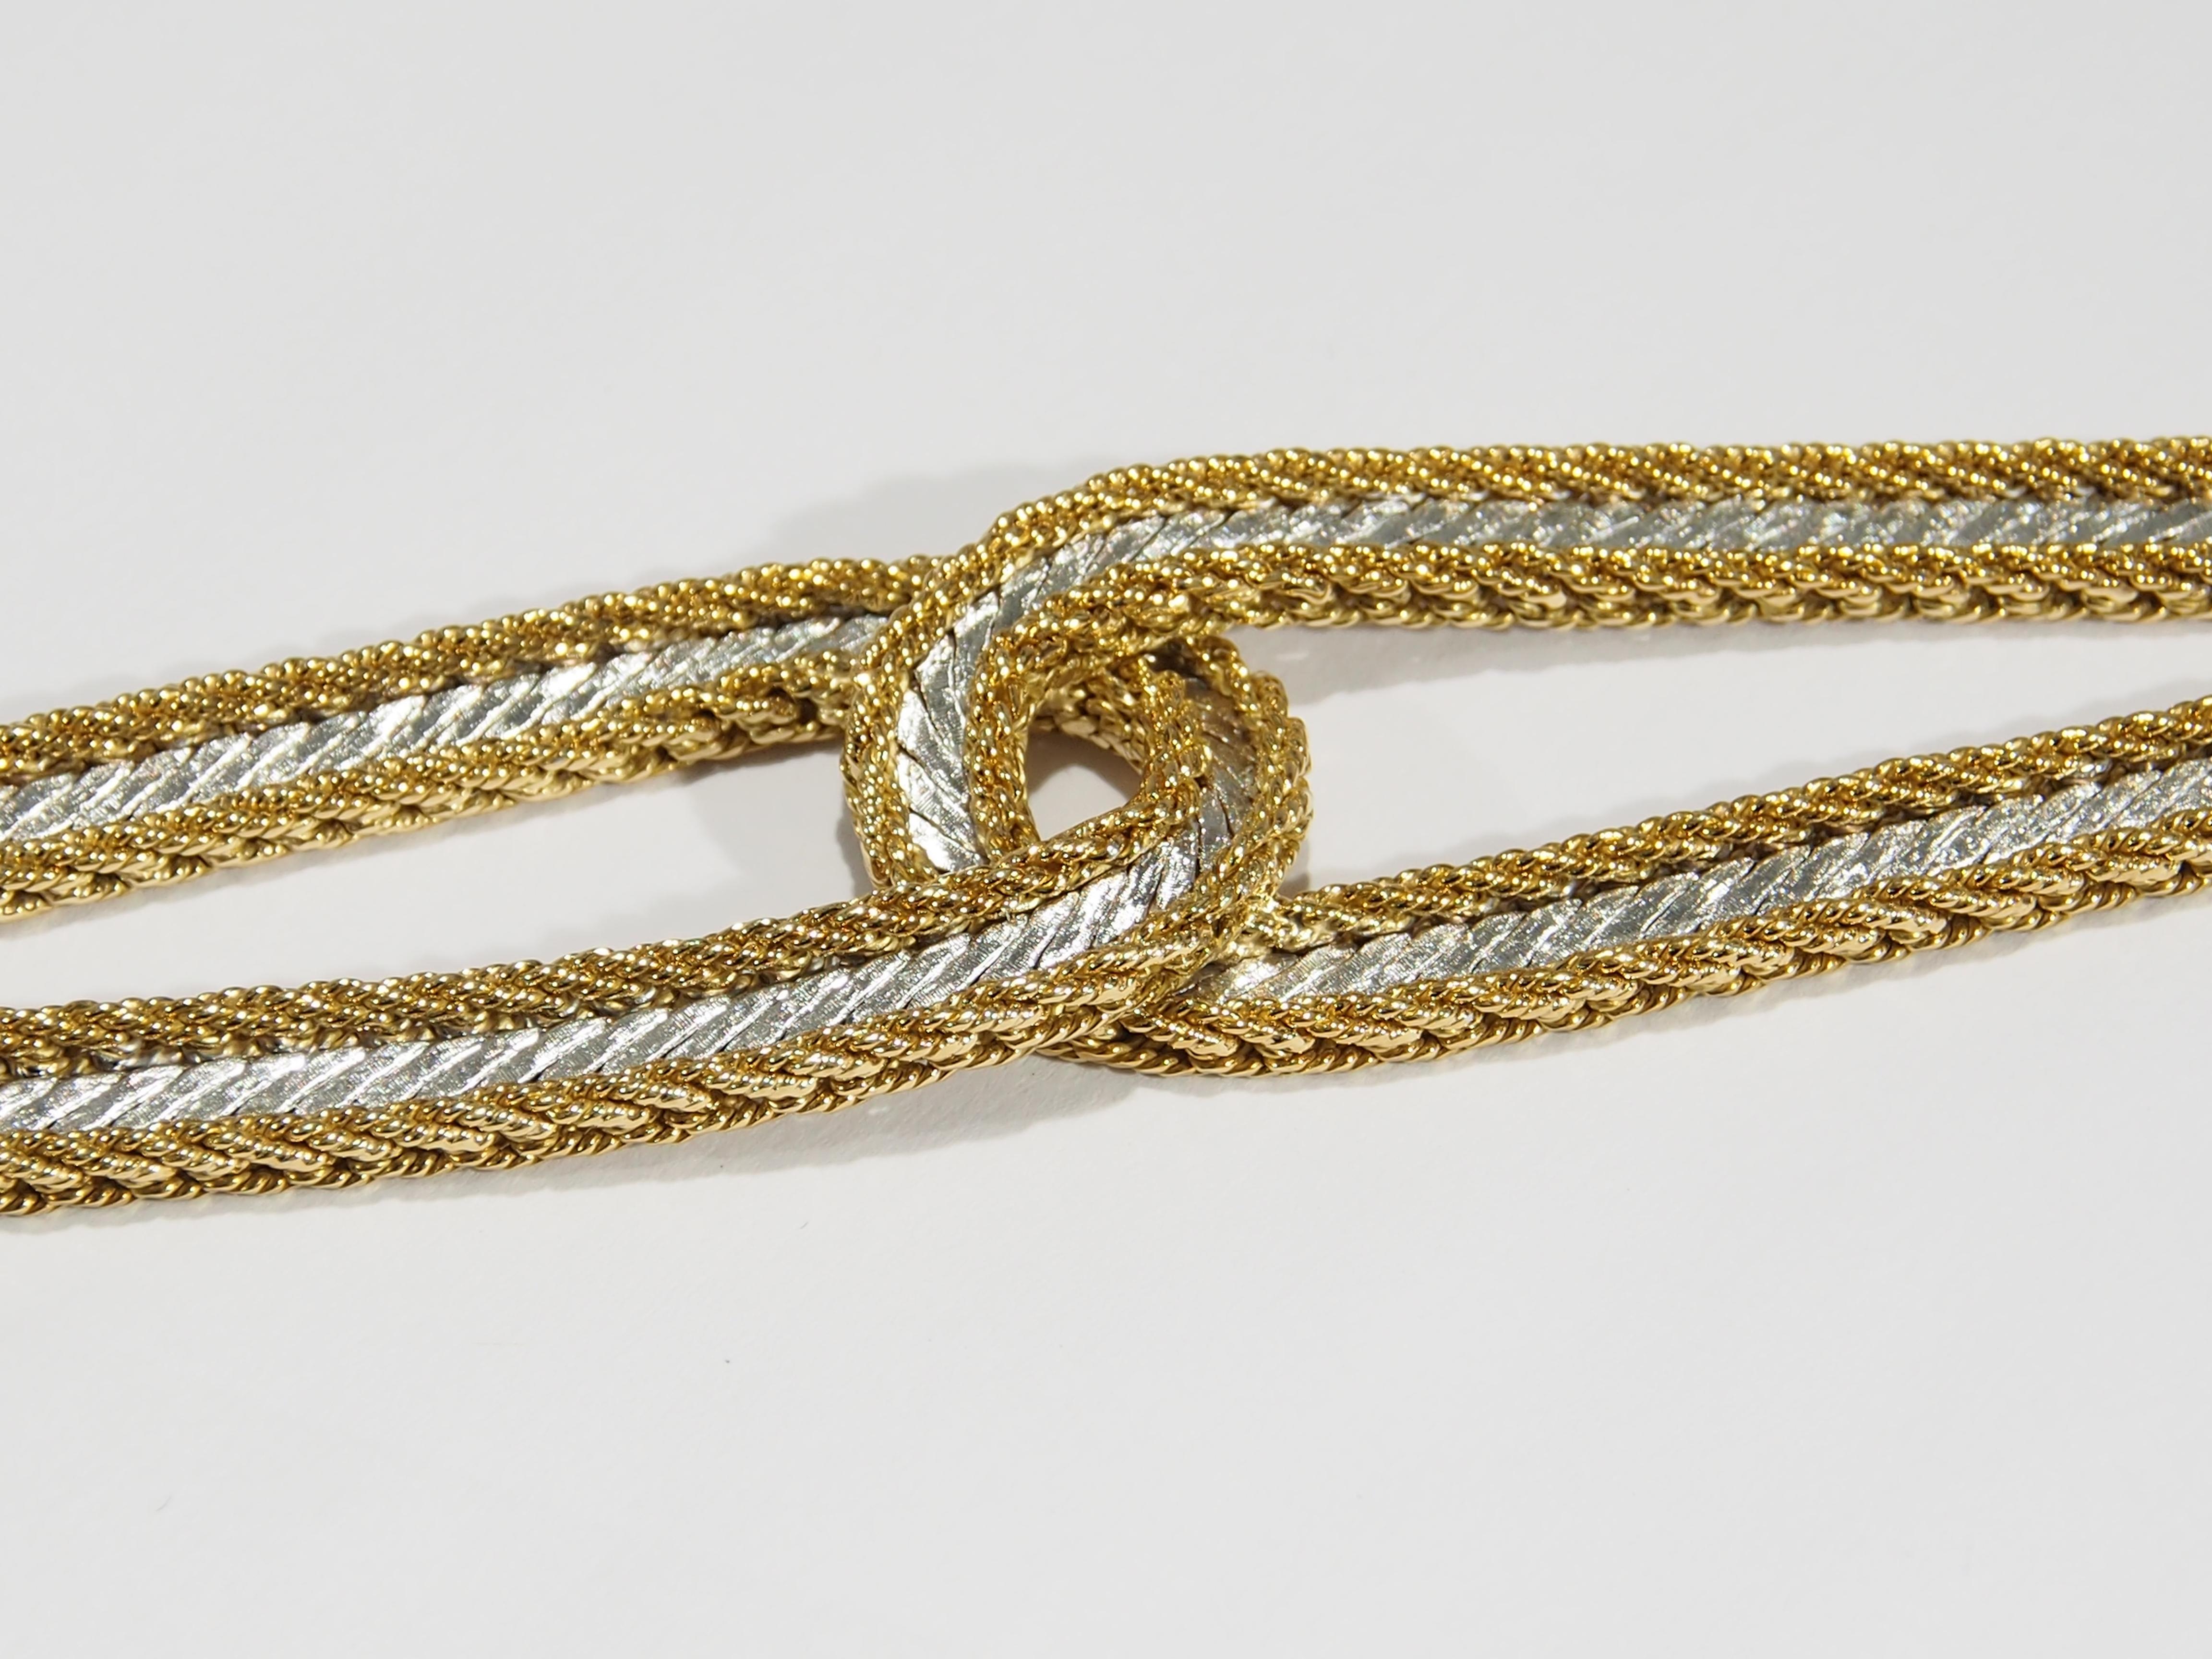 From the well respected jewelry designer, Buccellati, is this 18K Yellow Gold Bracelet. A timeless style with Yellow Gold roping accenting a Flatten White Gold braid fashioned in an interlocking link. The widest portion is 1 inch in width tapering